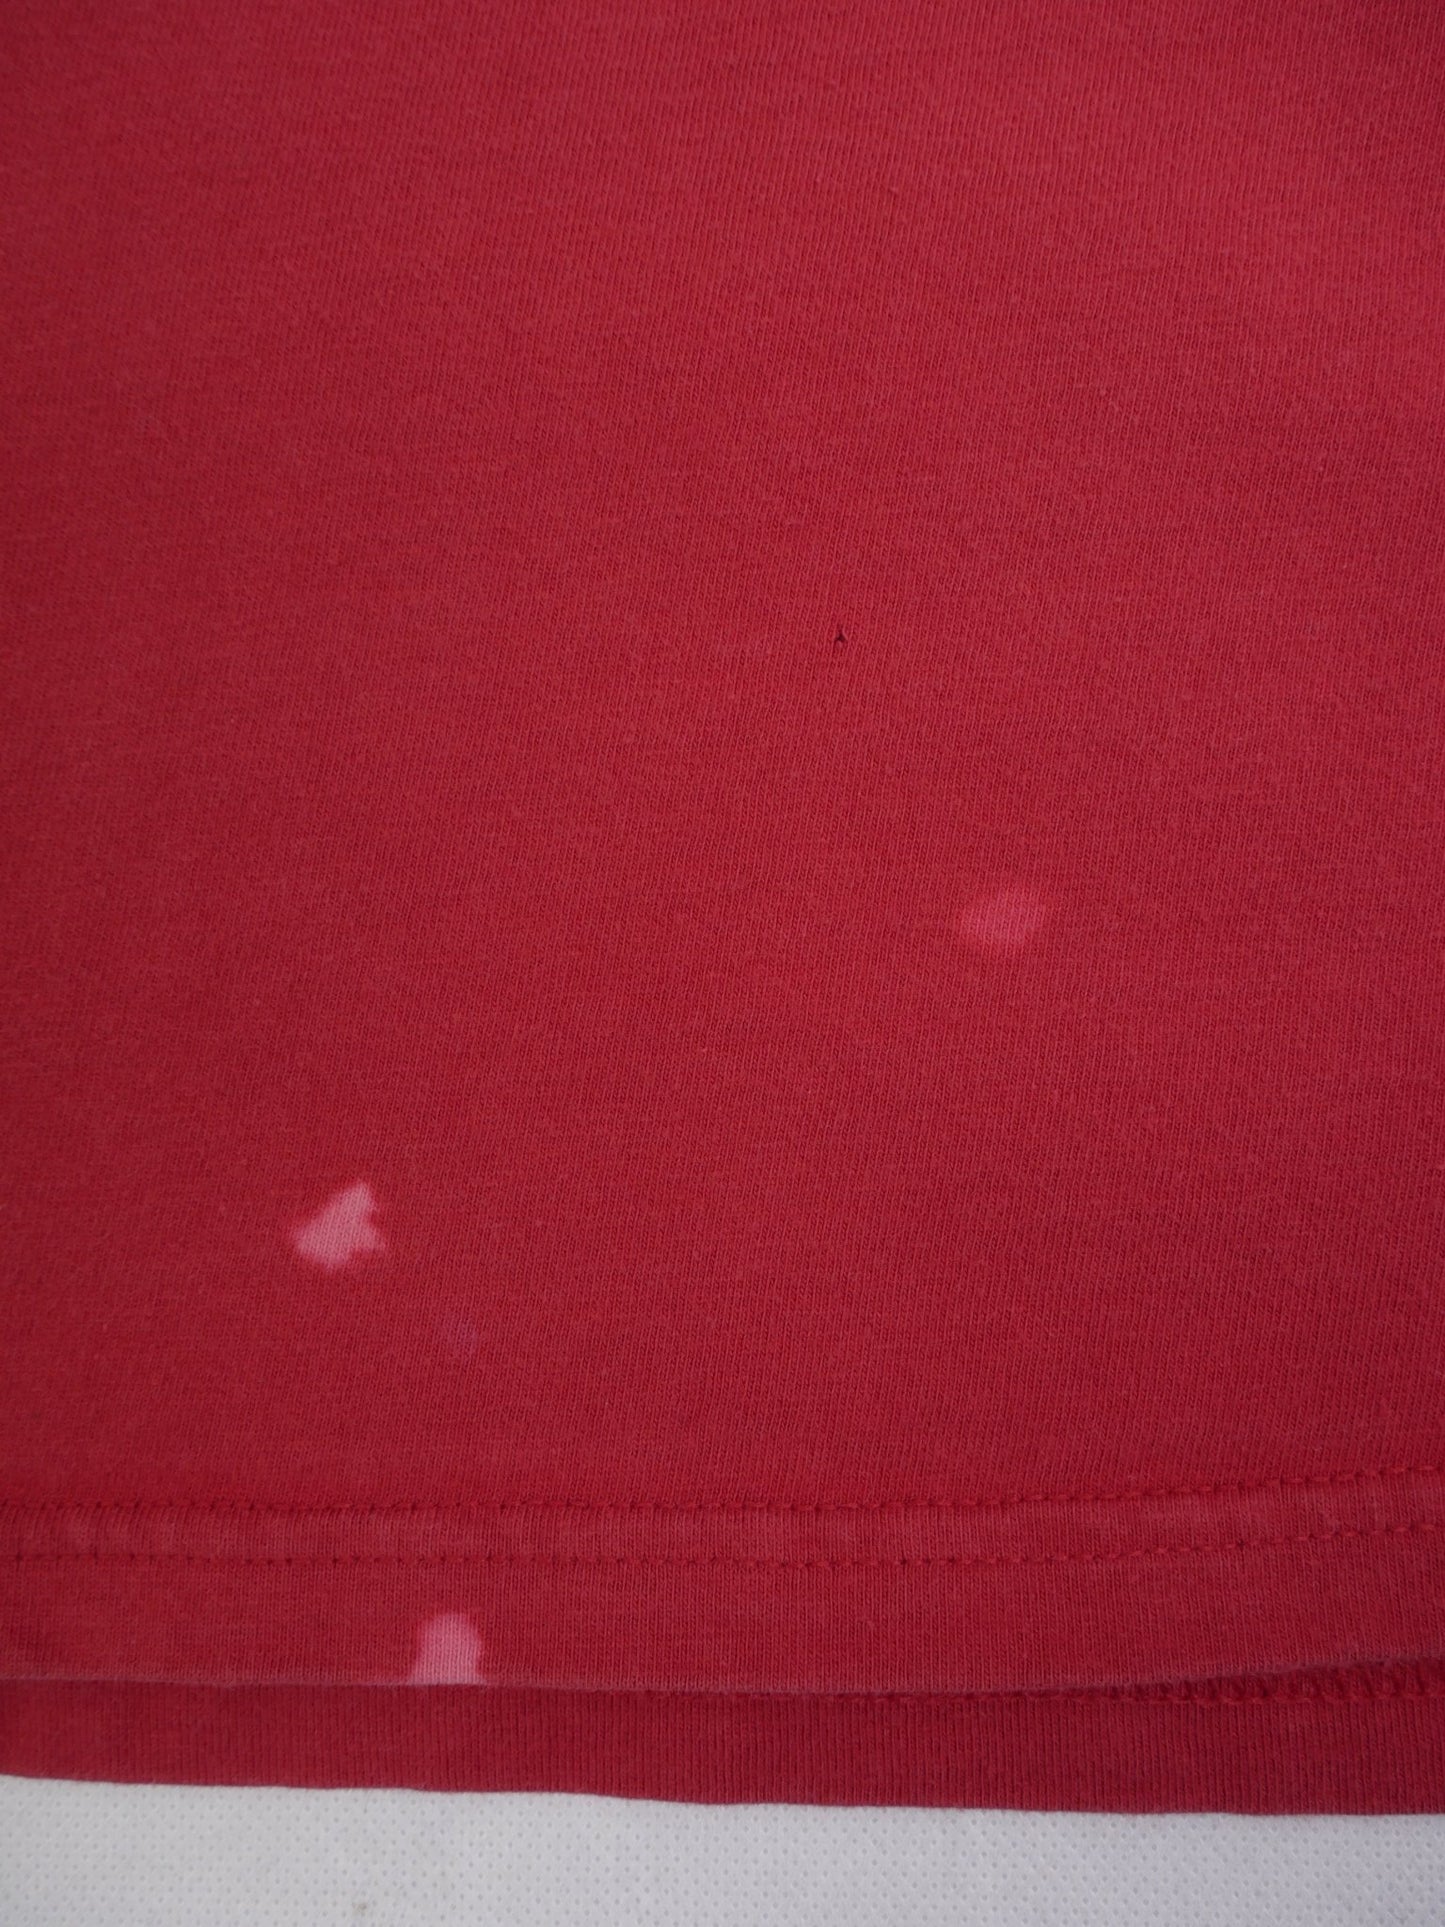 nike embroidered Swoosh red Shirt - Peeces